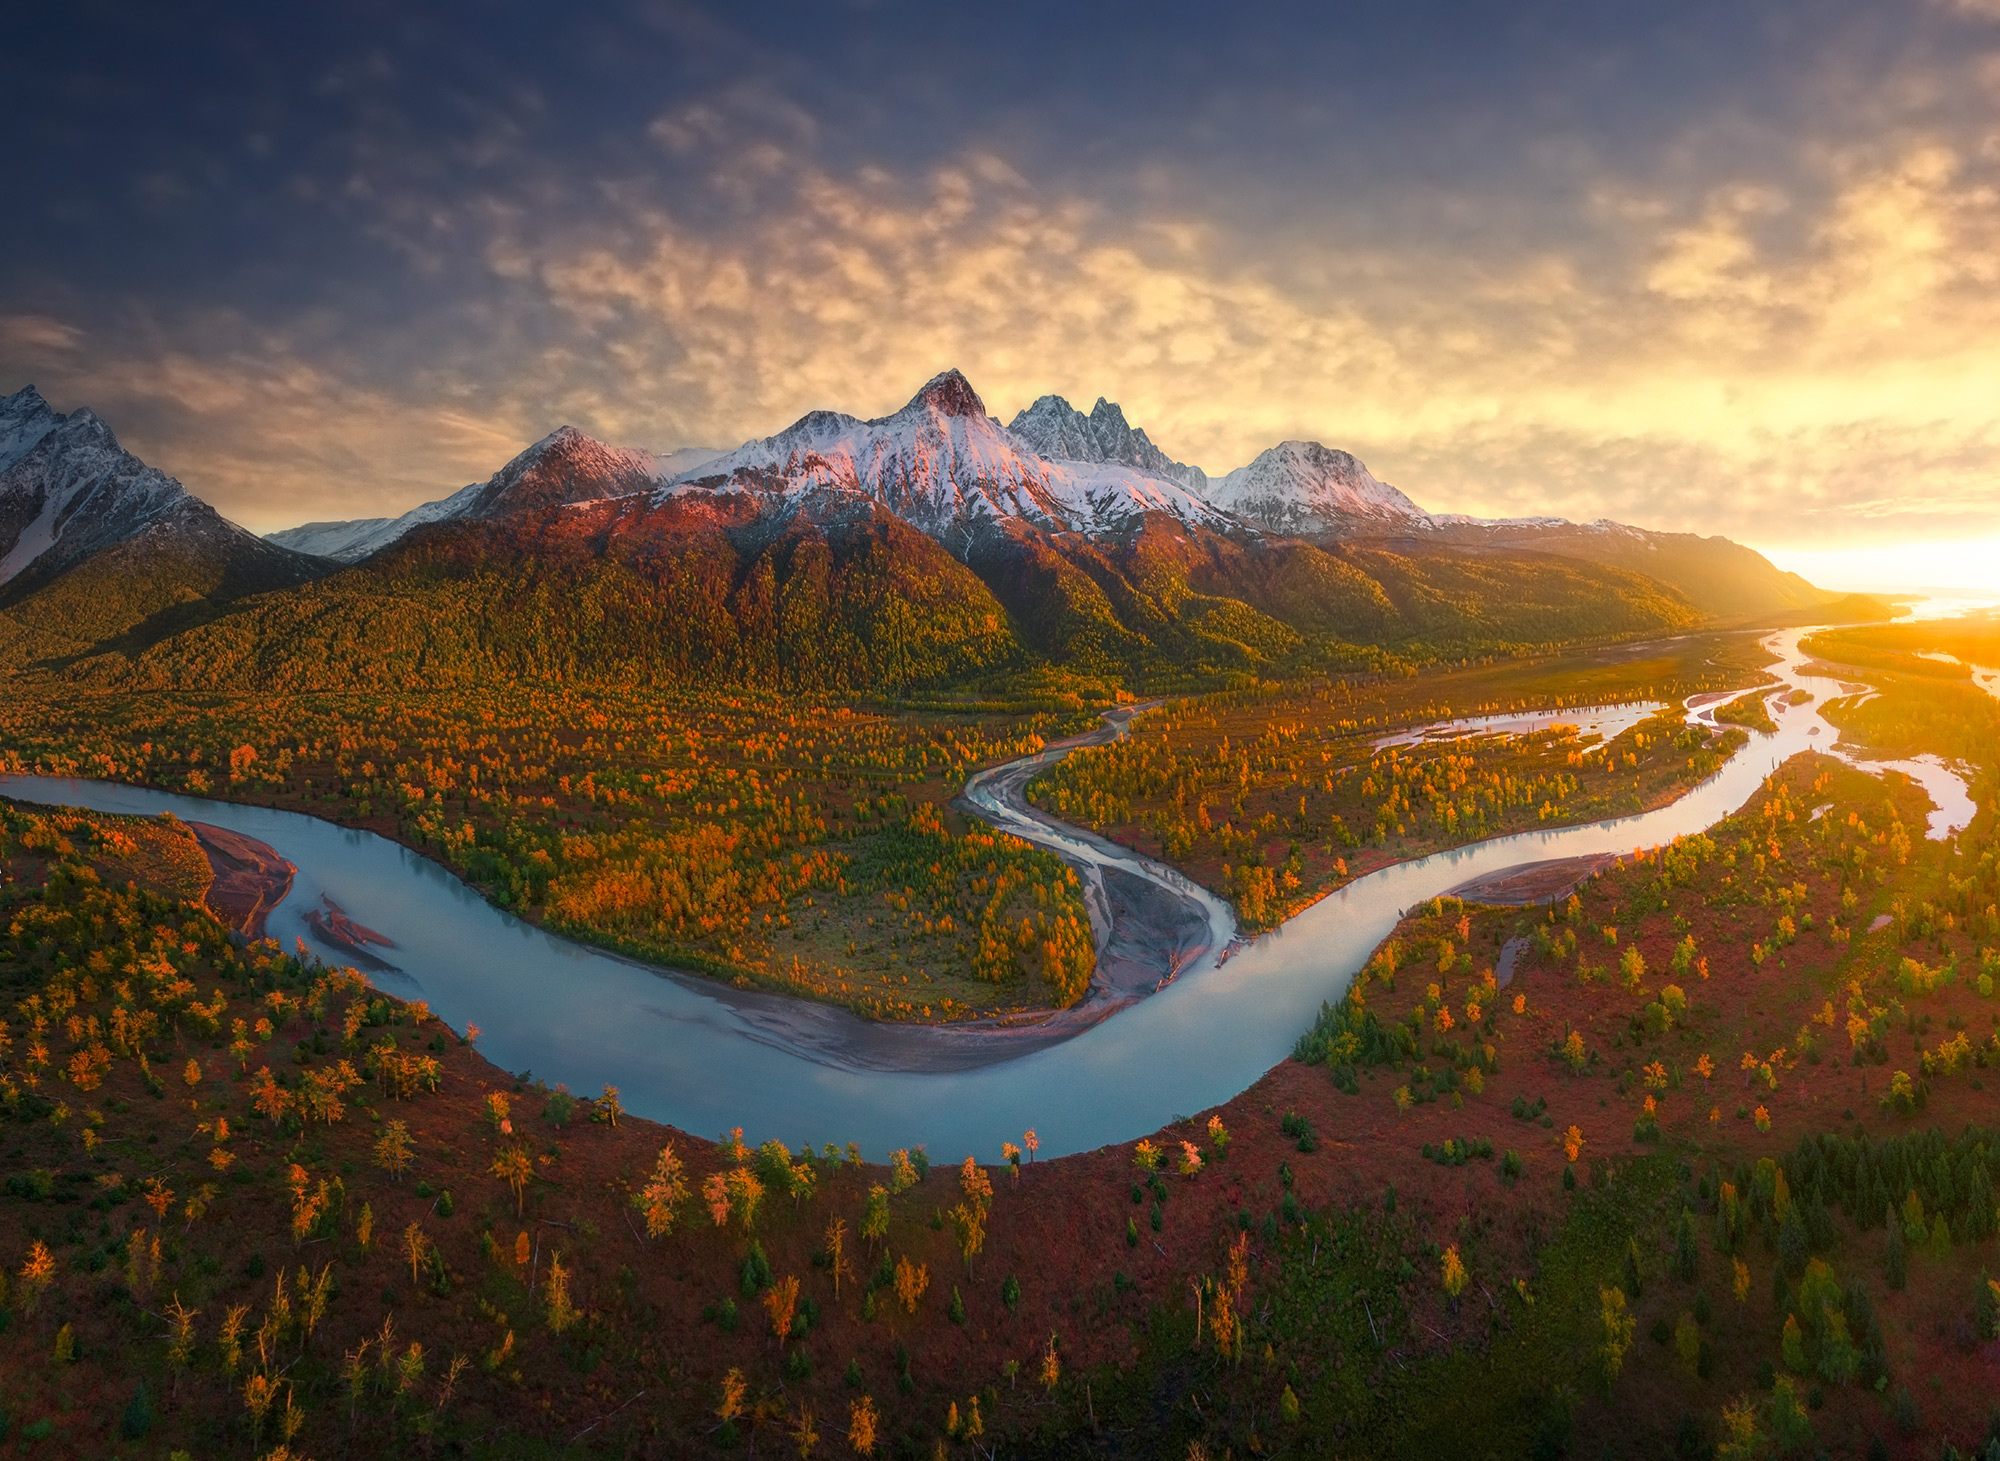 Geese fly overhead Chugach Peaks amidst an amazing sunset and red fall colors in Alaska.